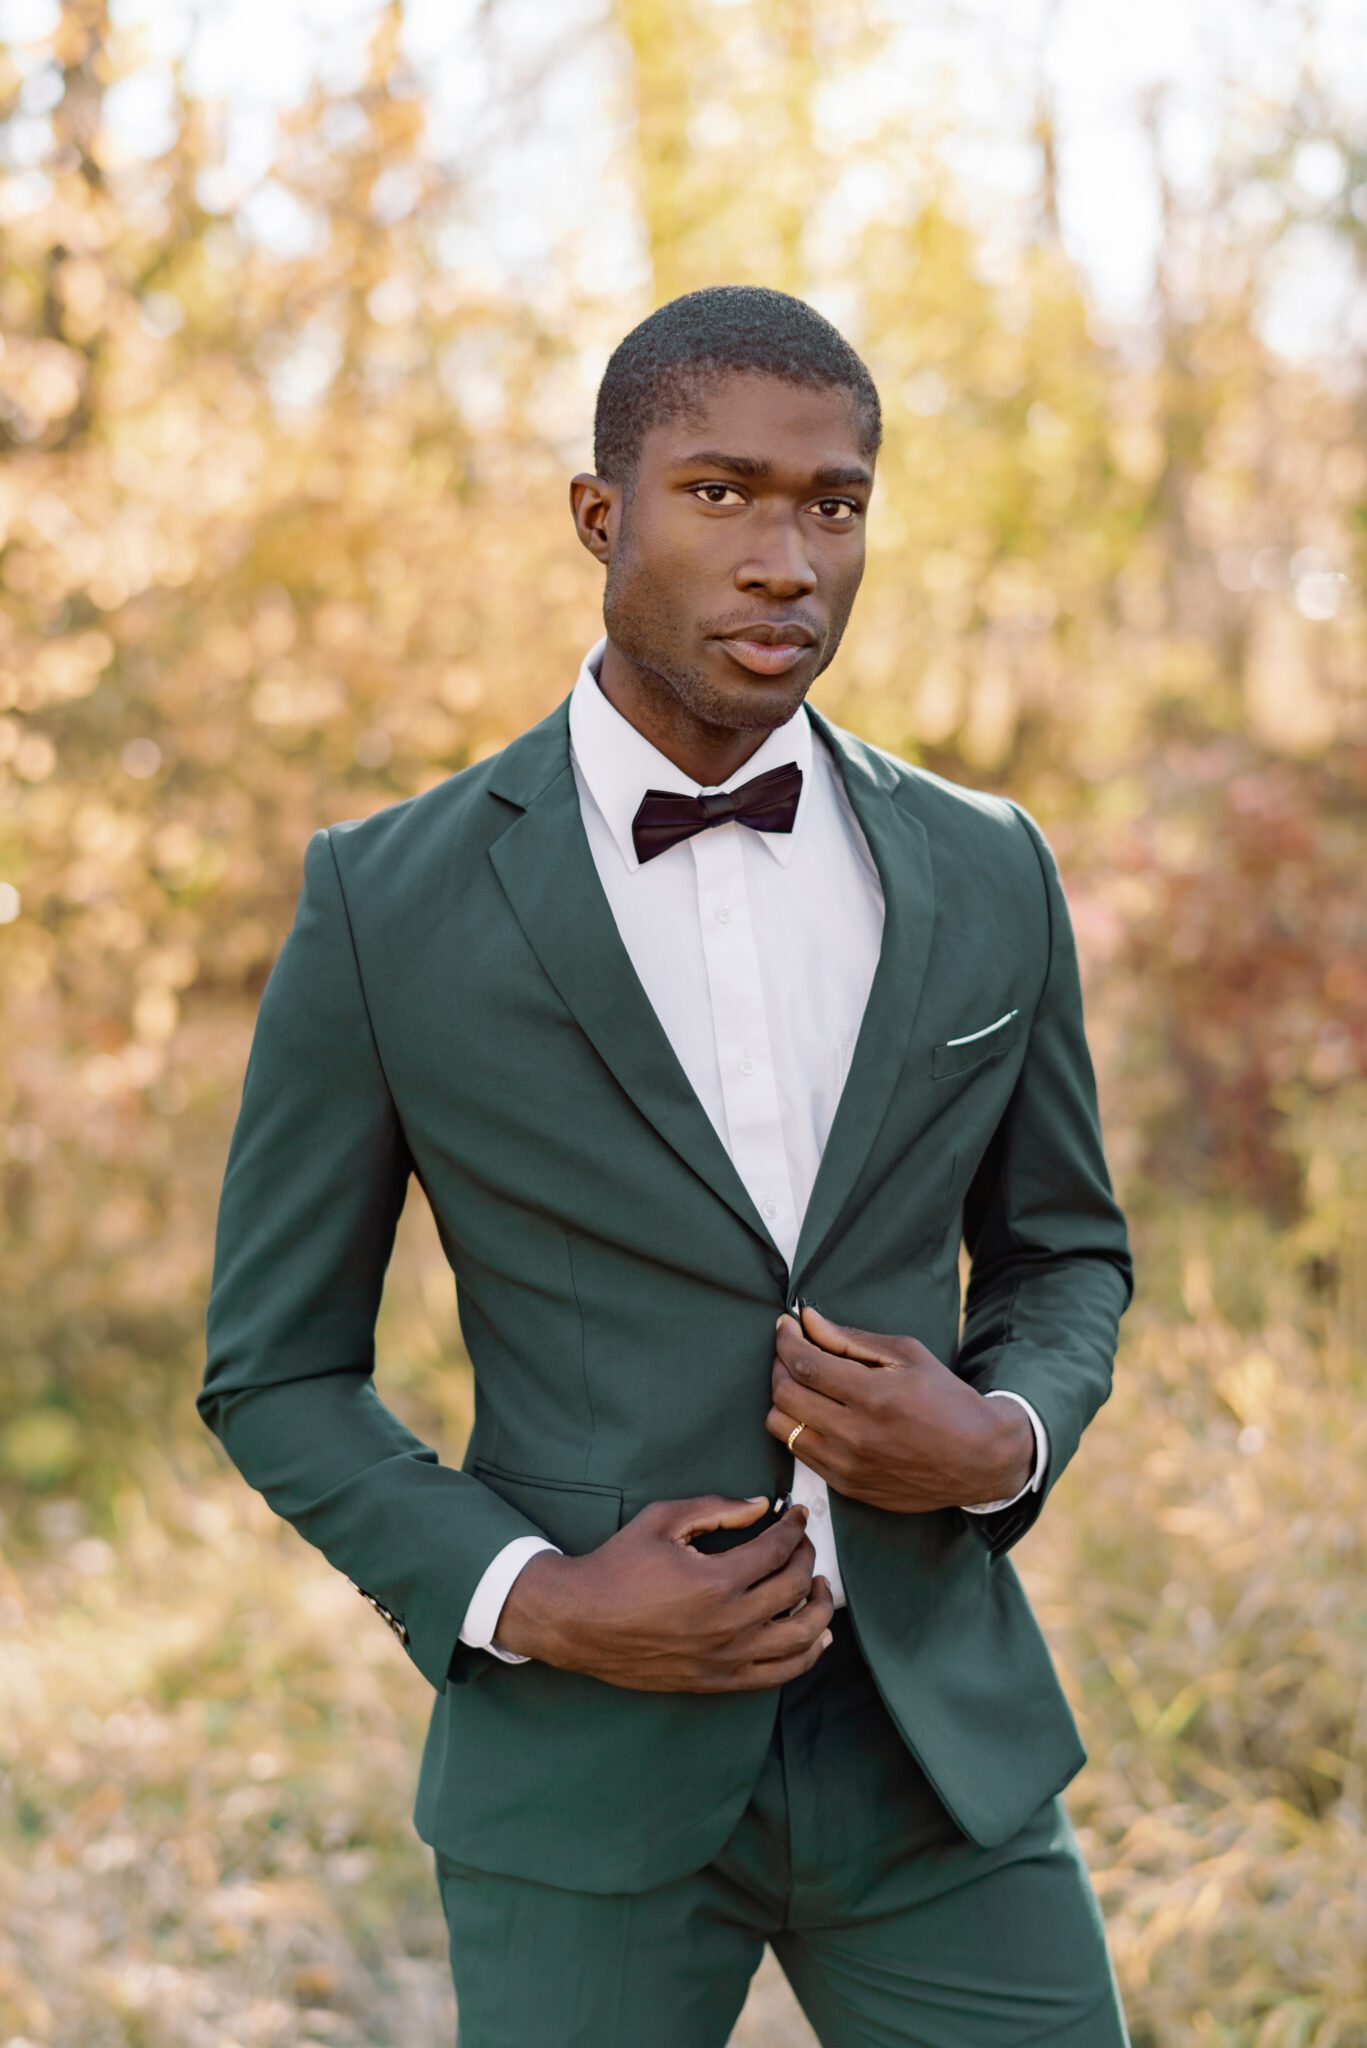 Groom wearing emerald green suit at outdoor Fall wedding. Fine art photography by Kaity Body.